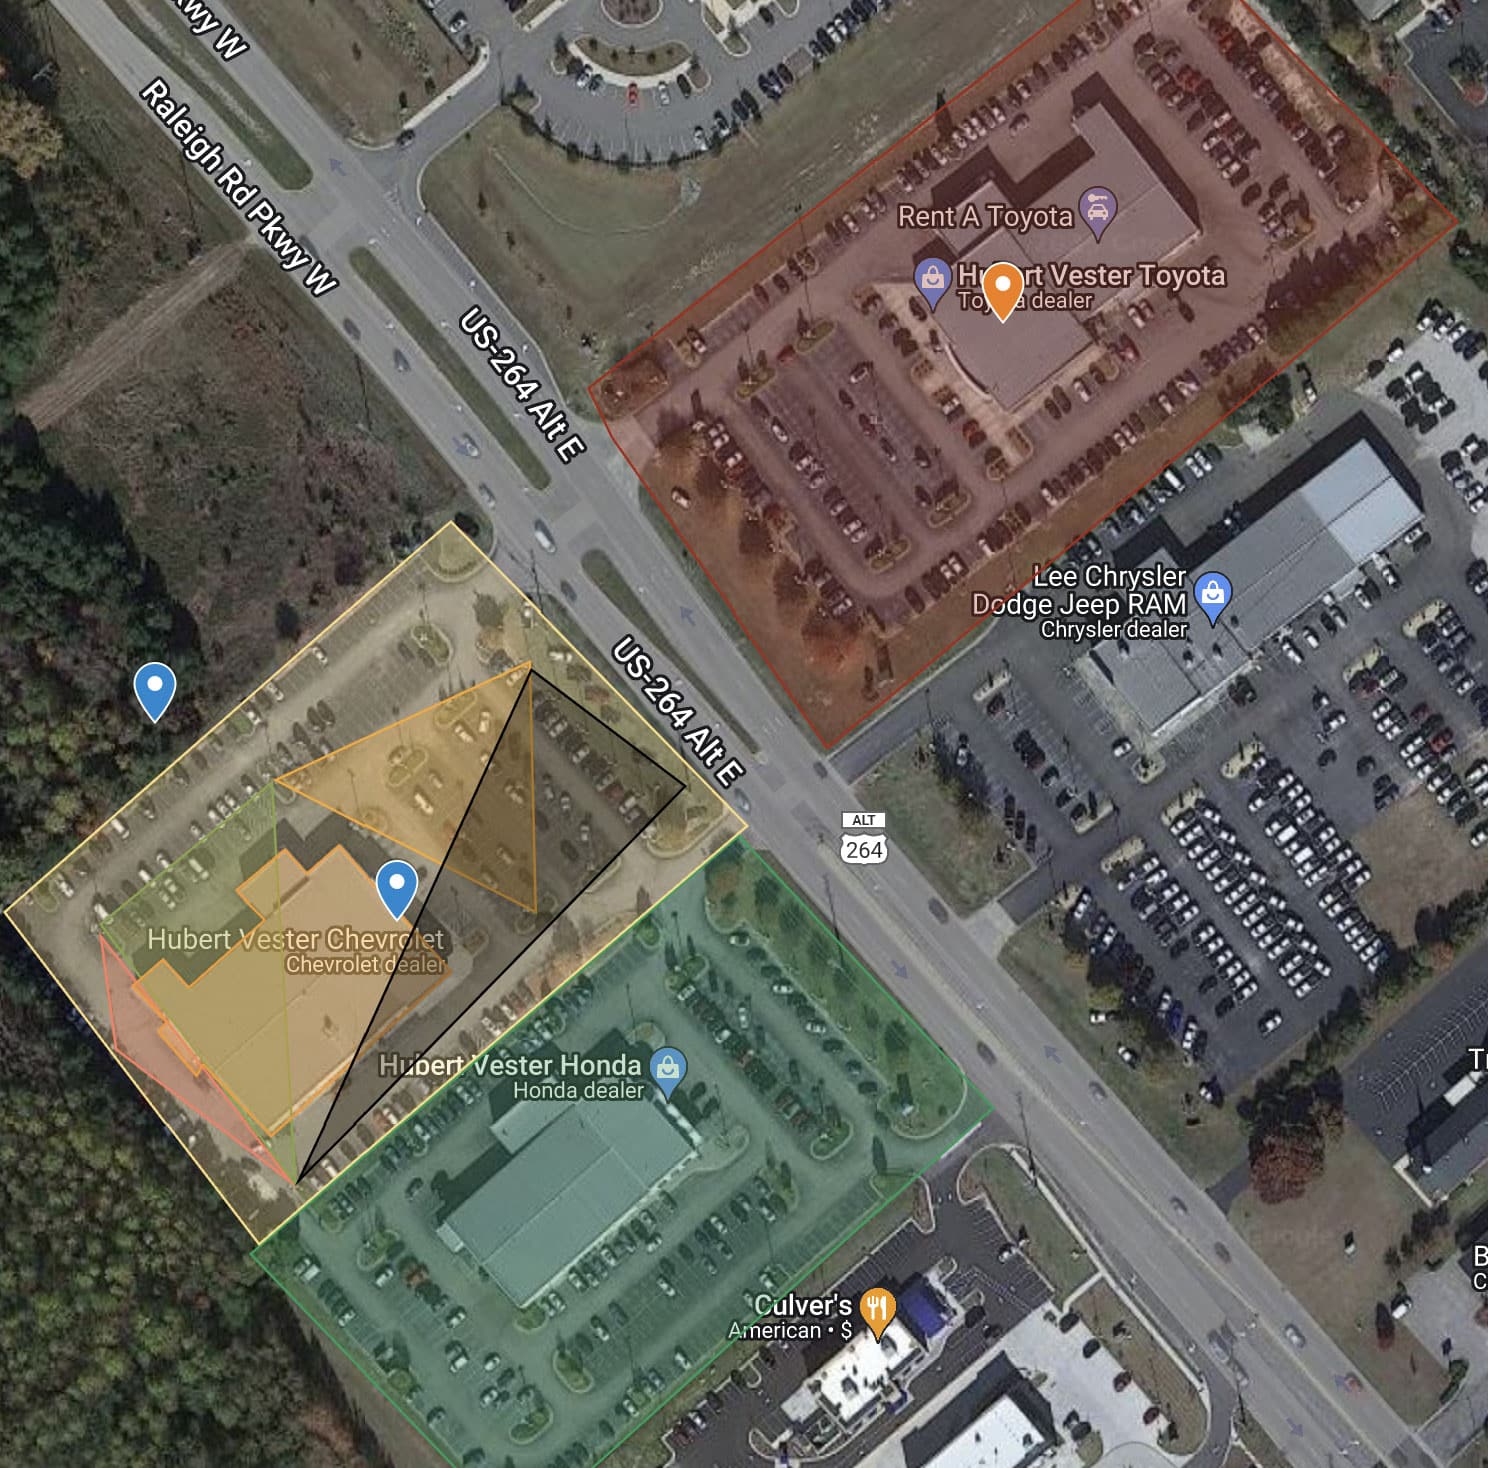 An aerial view map with color coded zones and location markers to indicate geofenced areas in car dealership.